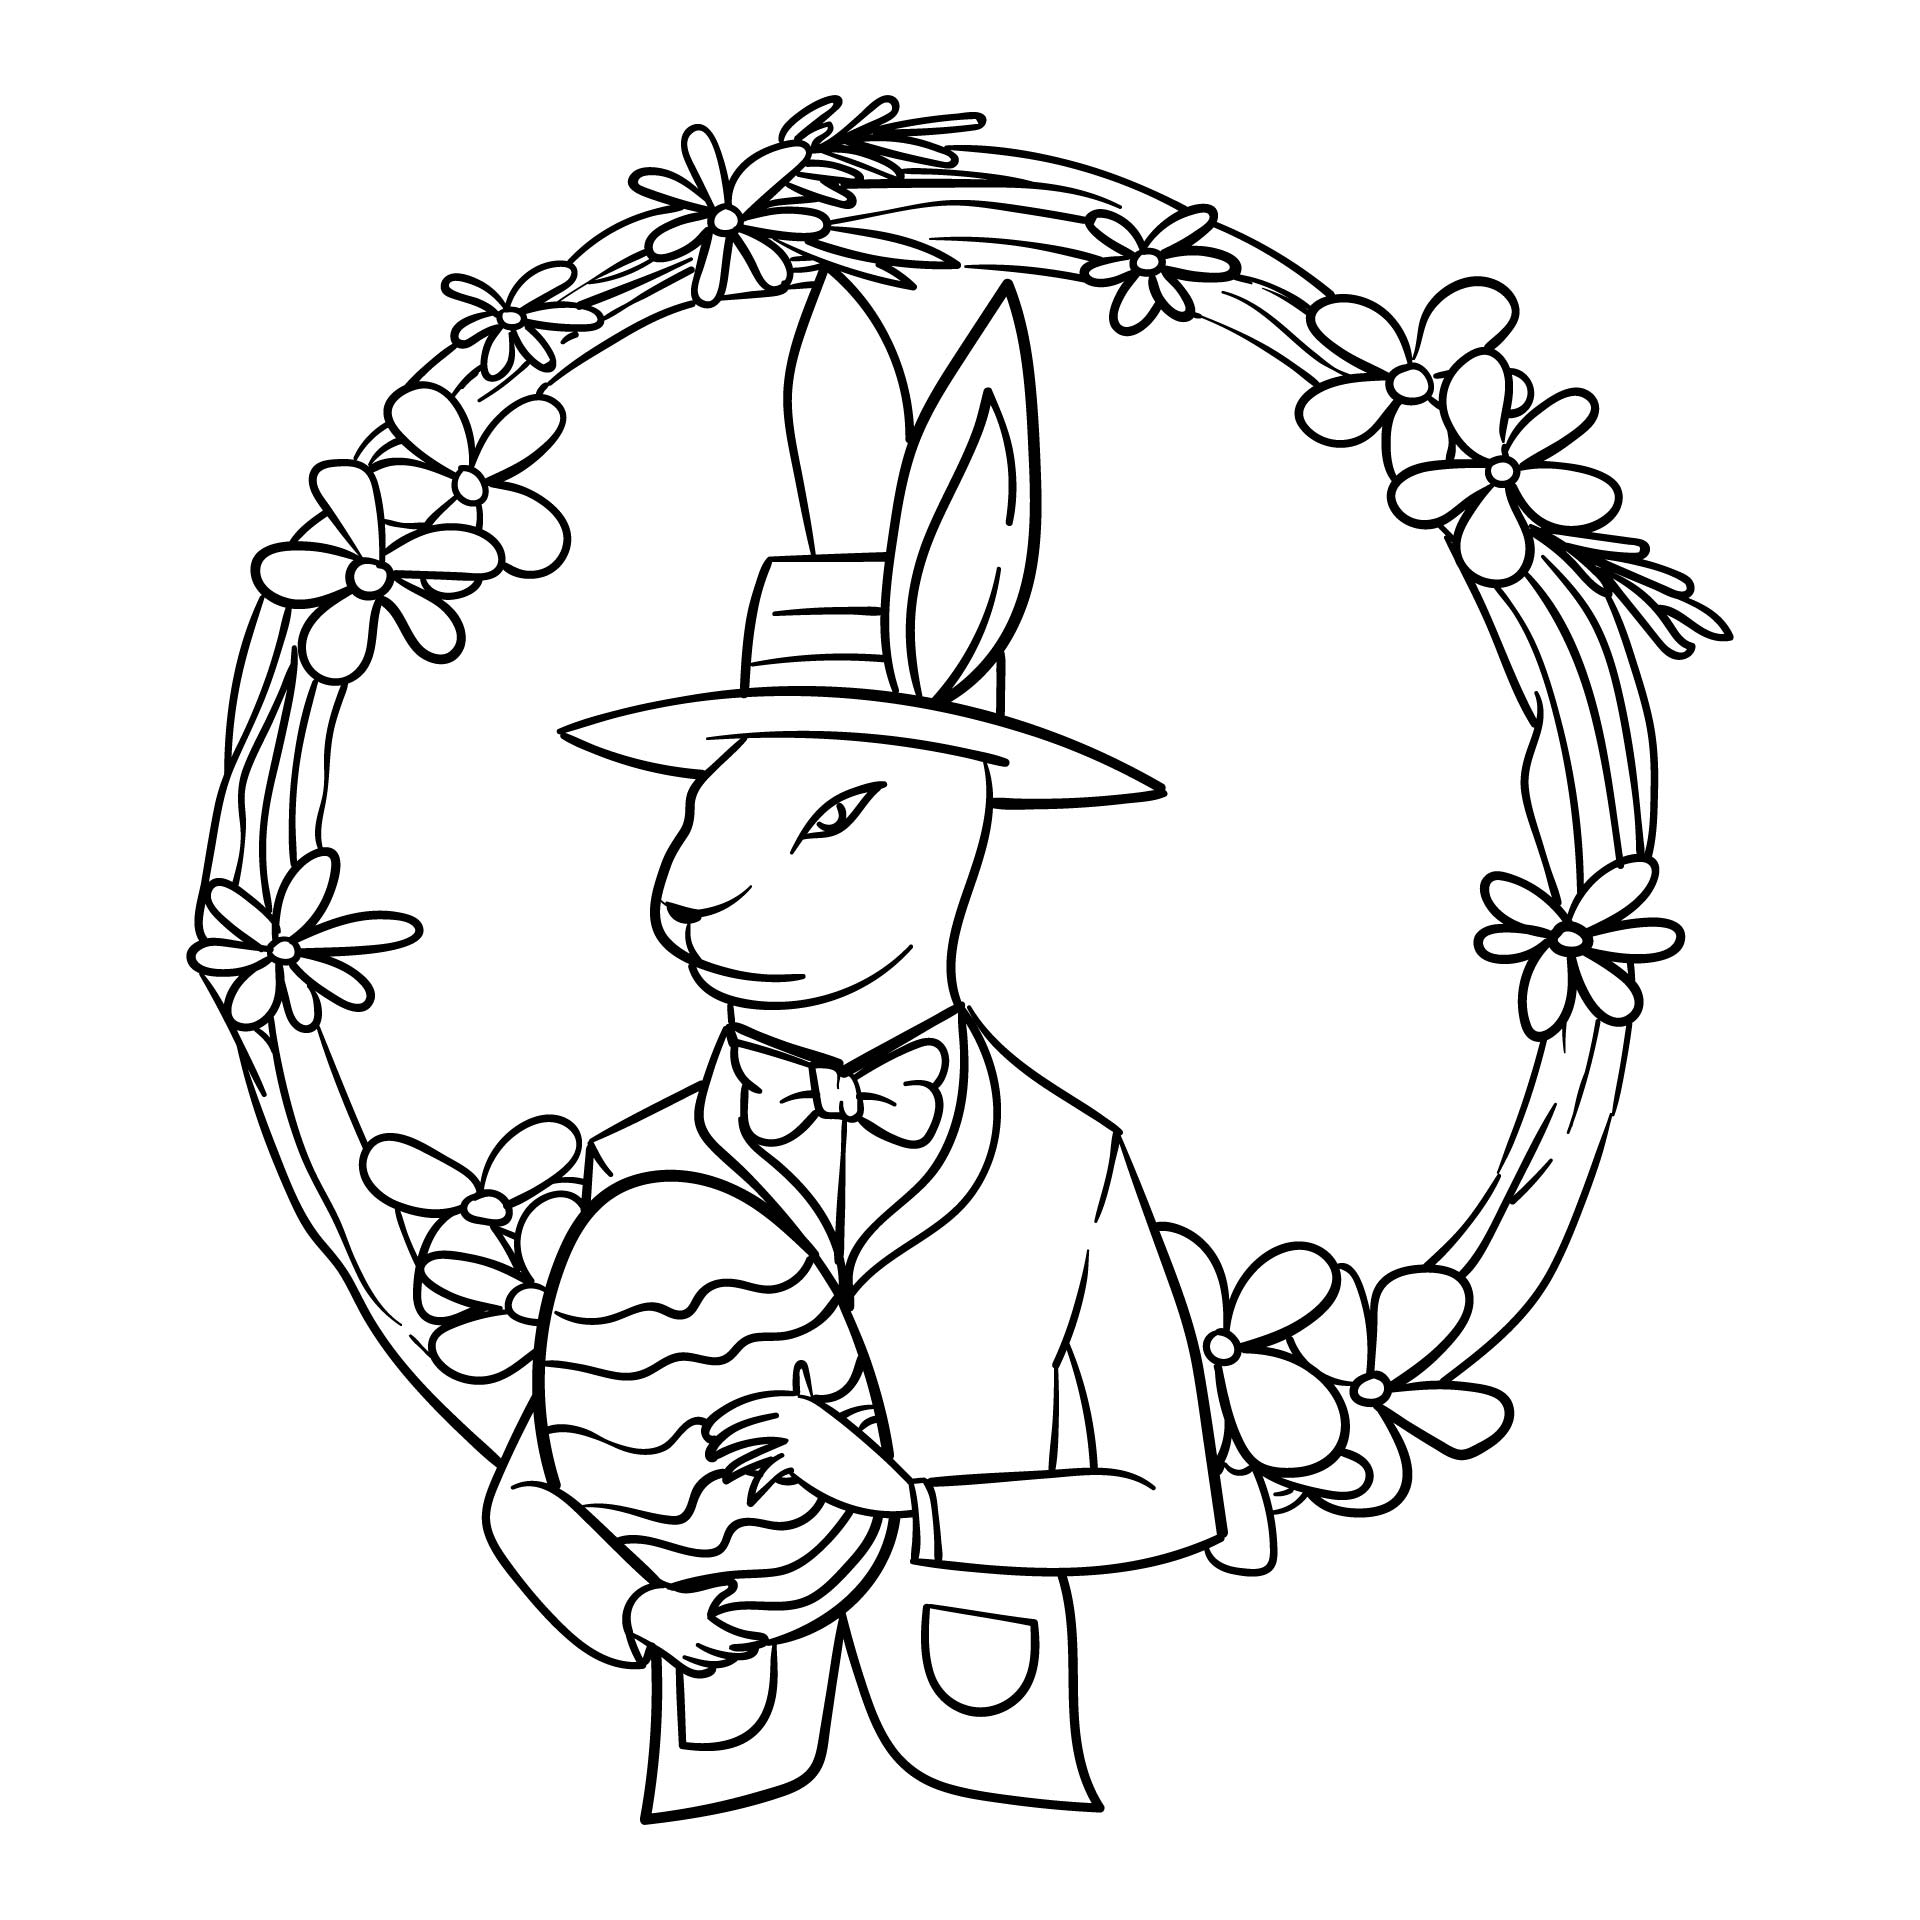 Printable Easter Coloring Pages For Adults